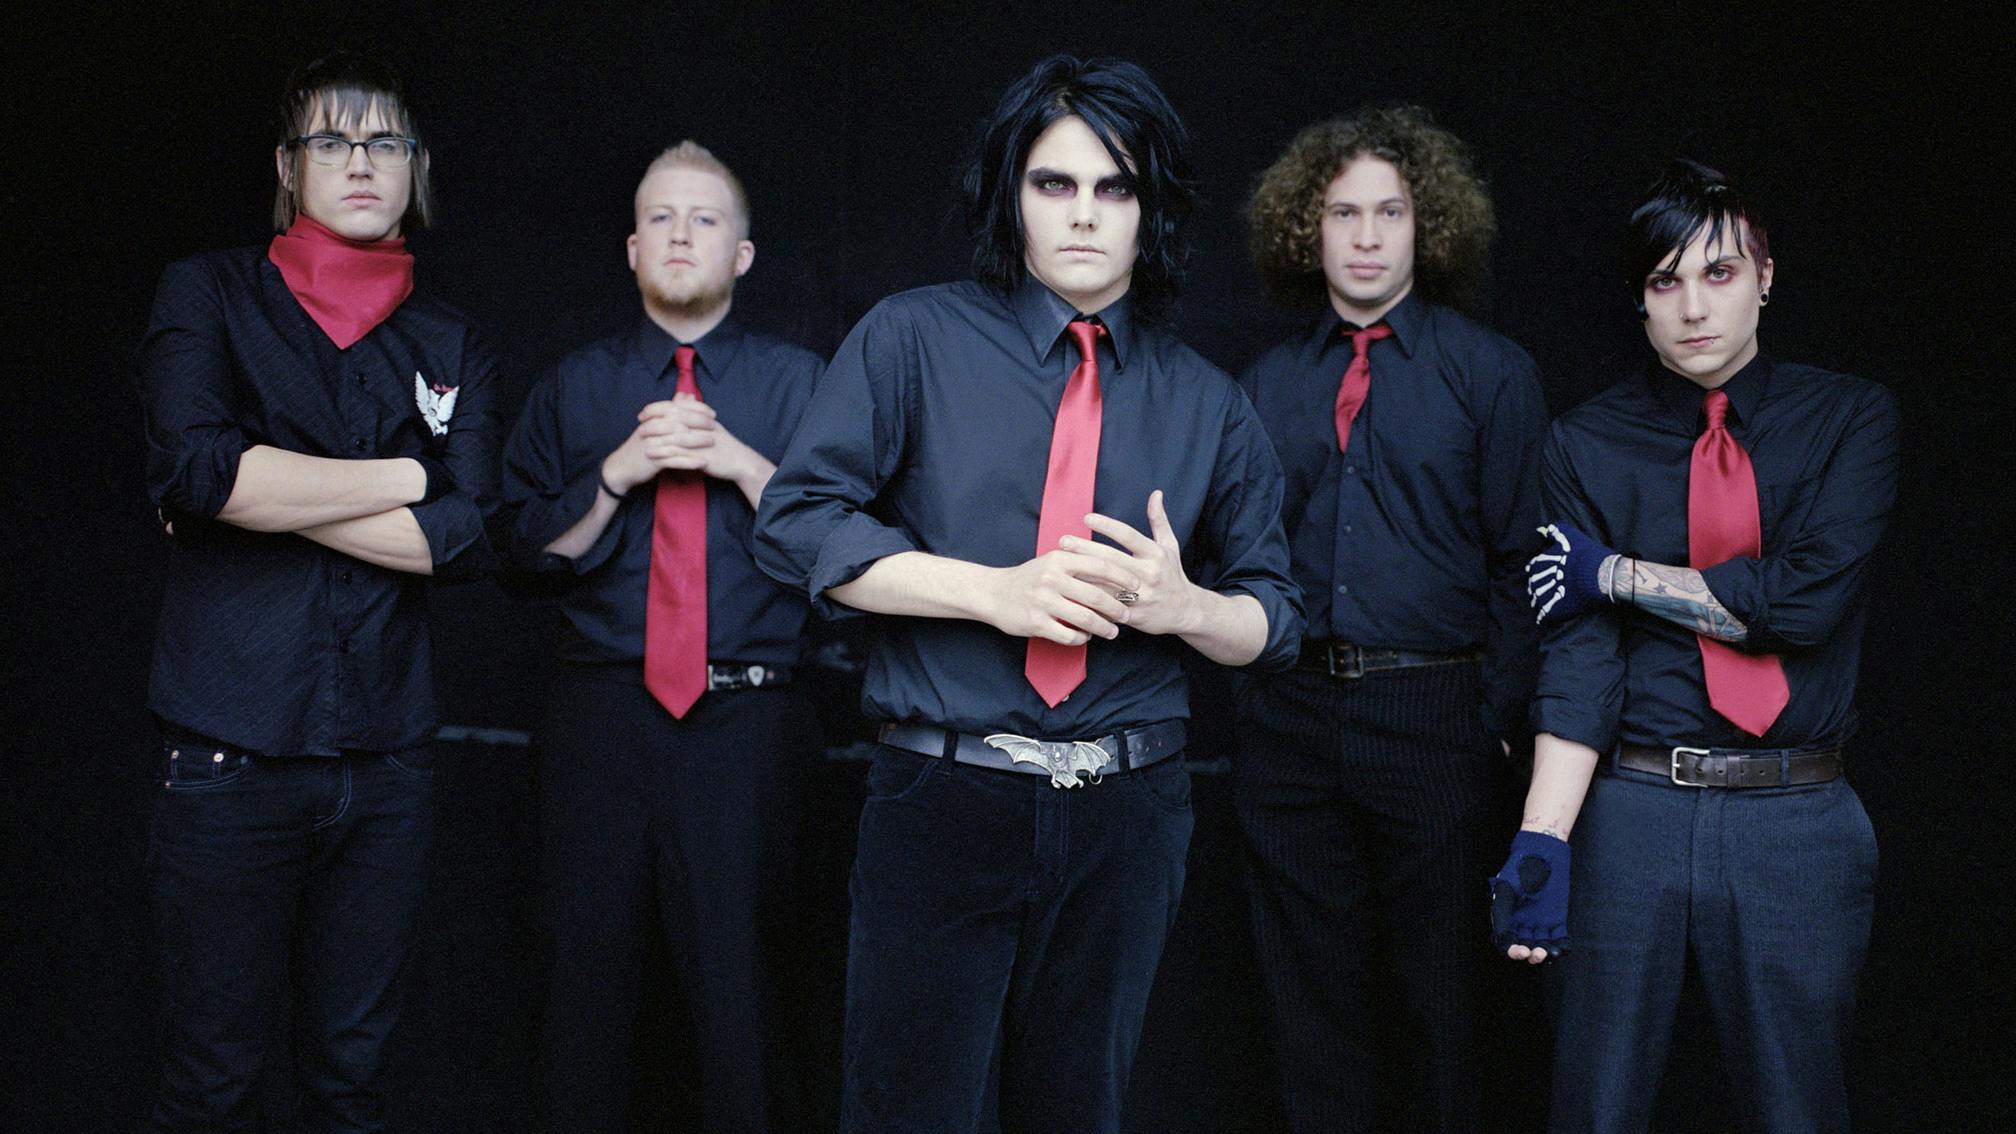 “We thrive on conflict, opposition… everything”: The story of MCR’s Three Cheers For Sweet Revenge